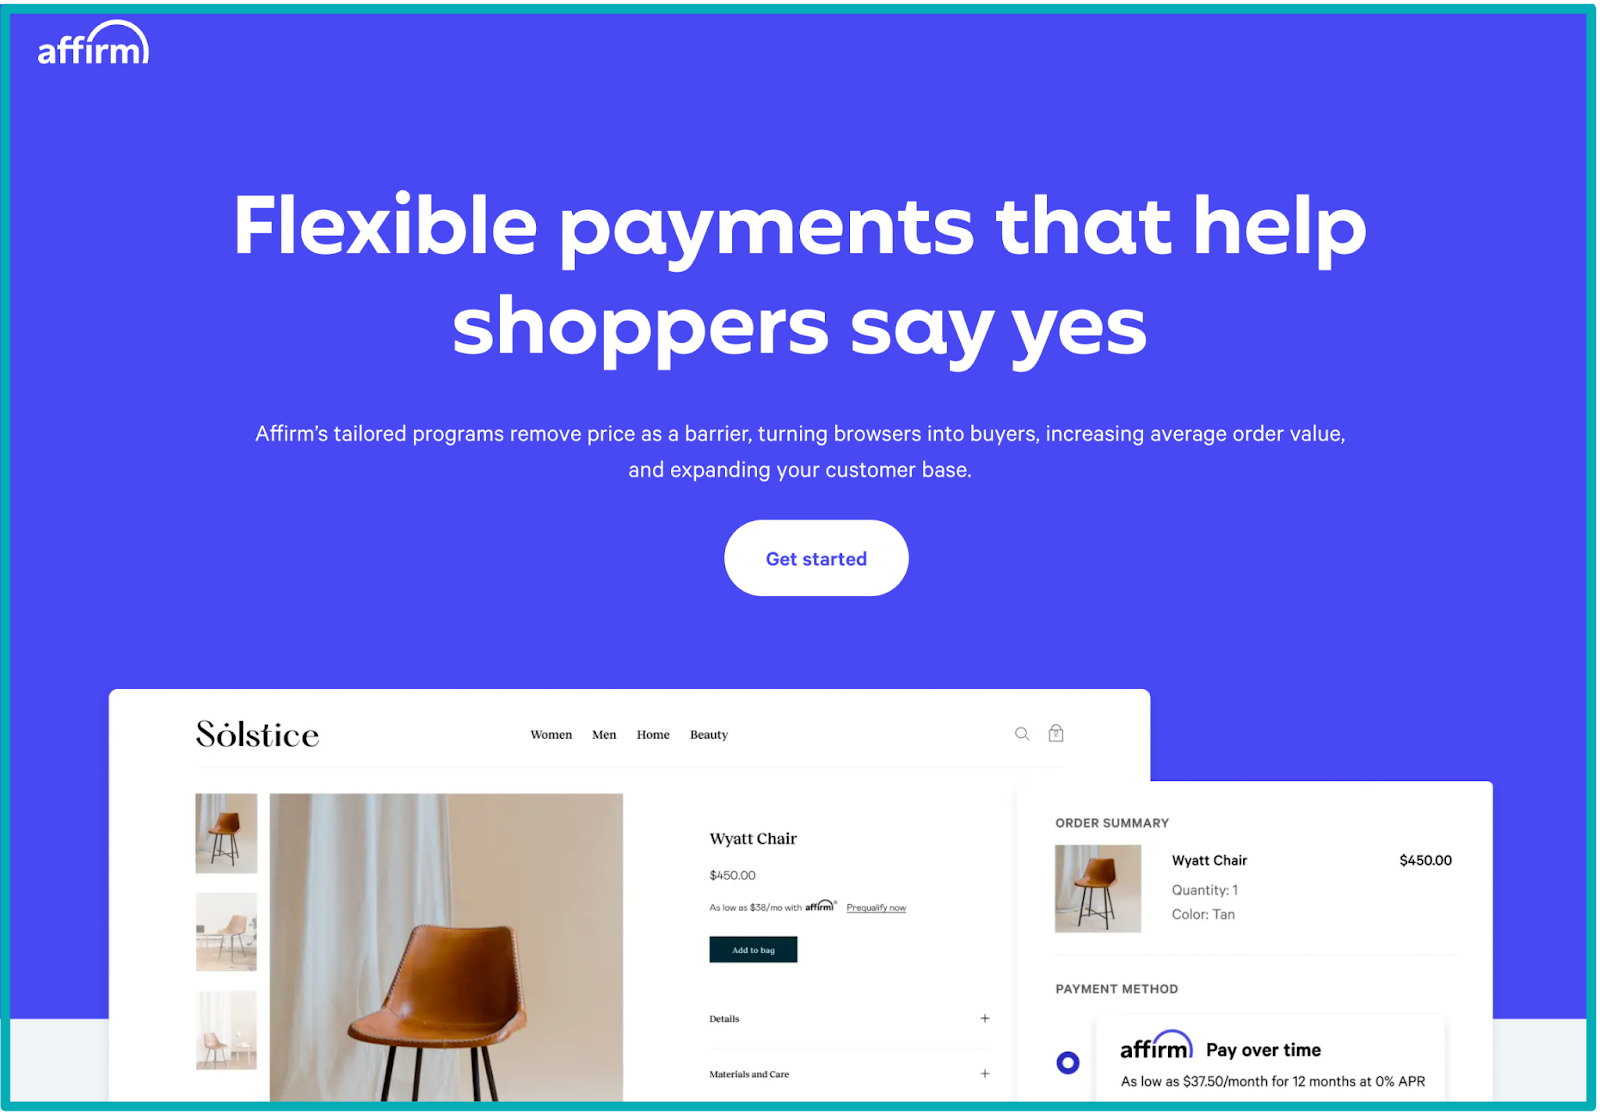 Affirm payments on Shopify